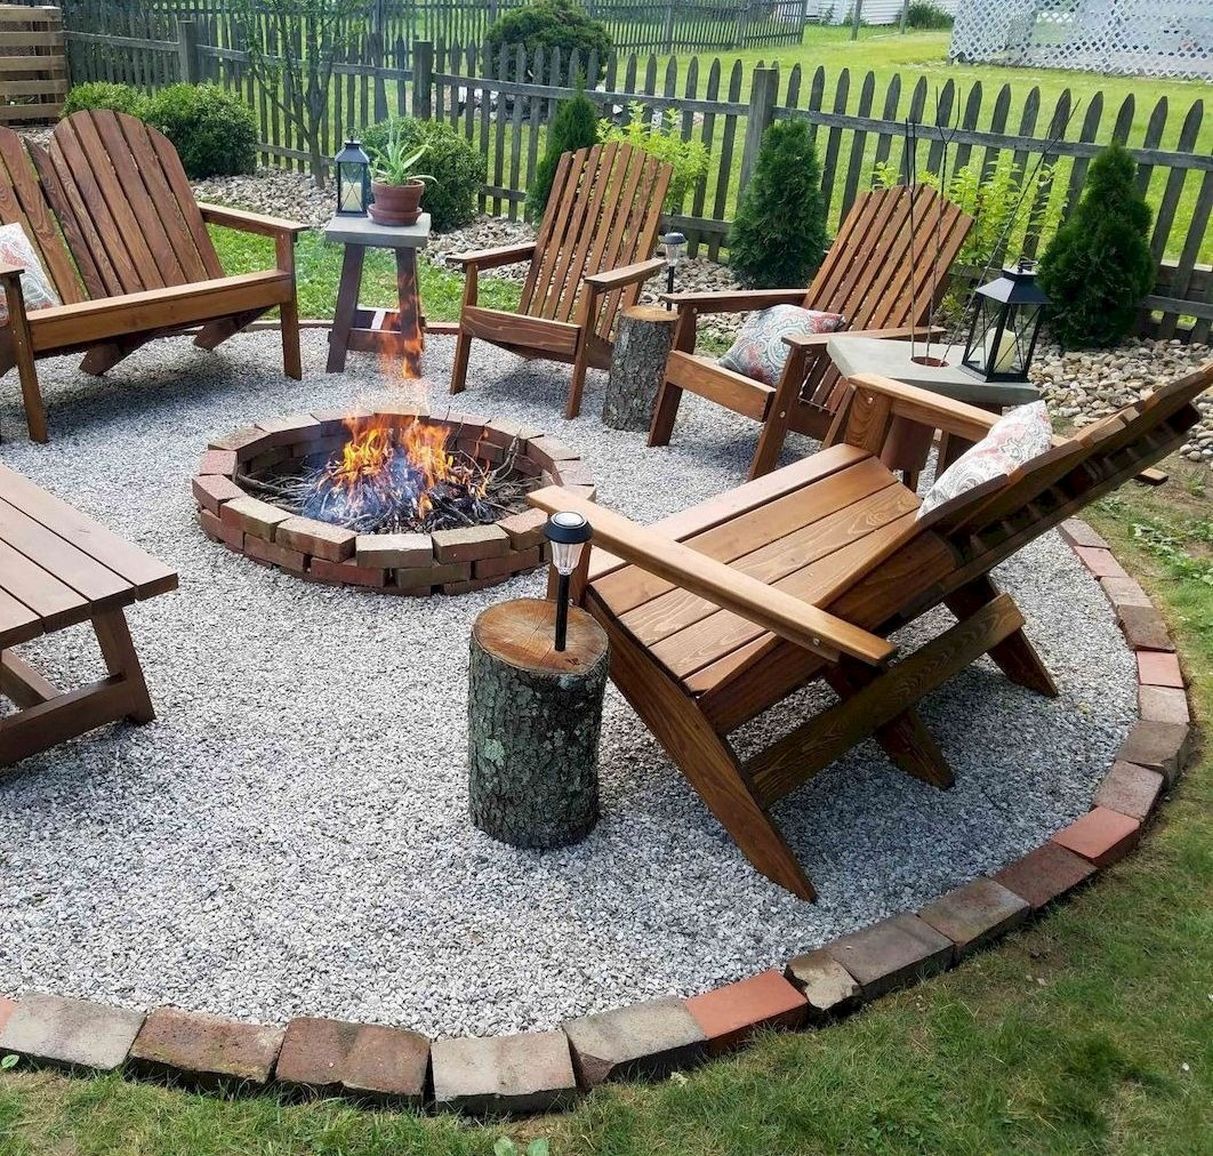  24 Backyard Fire Pit Ideas Landscaping Create A Relaxing Retreat With ...